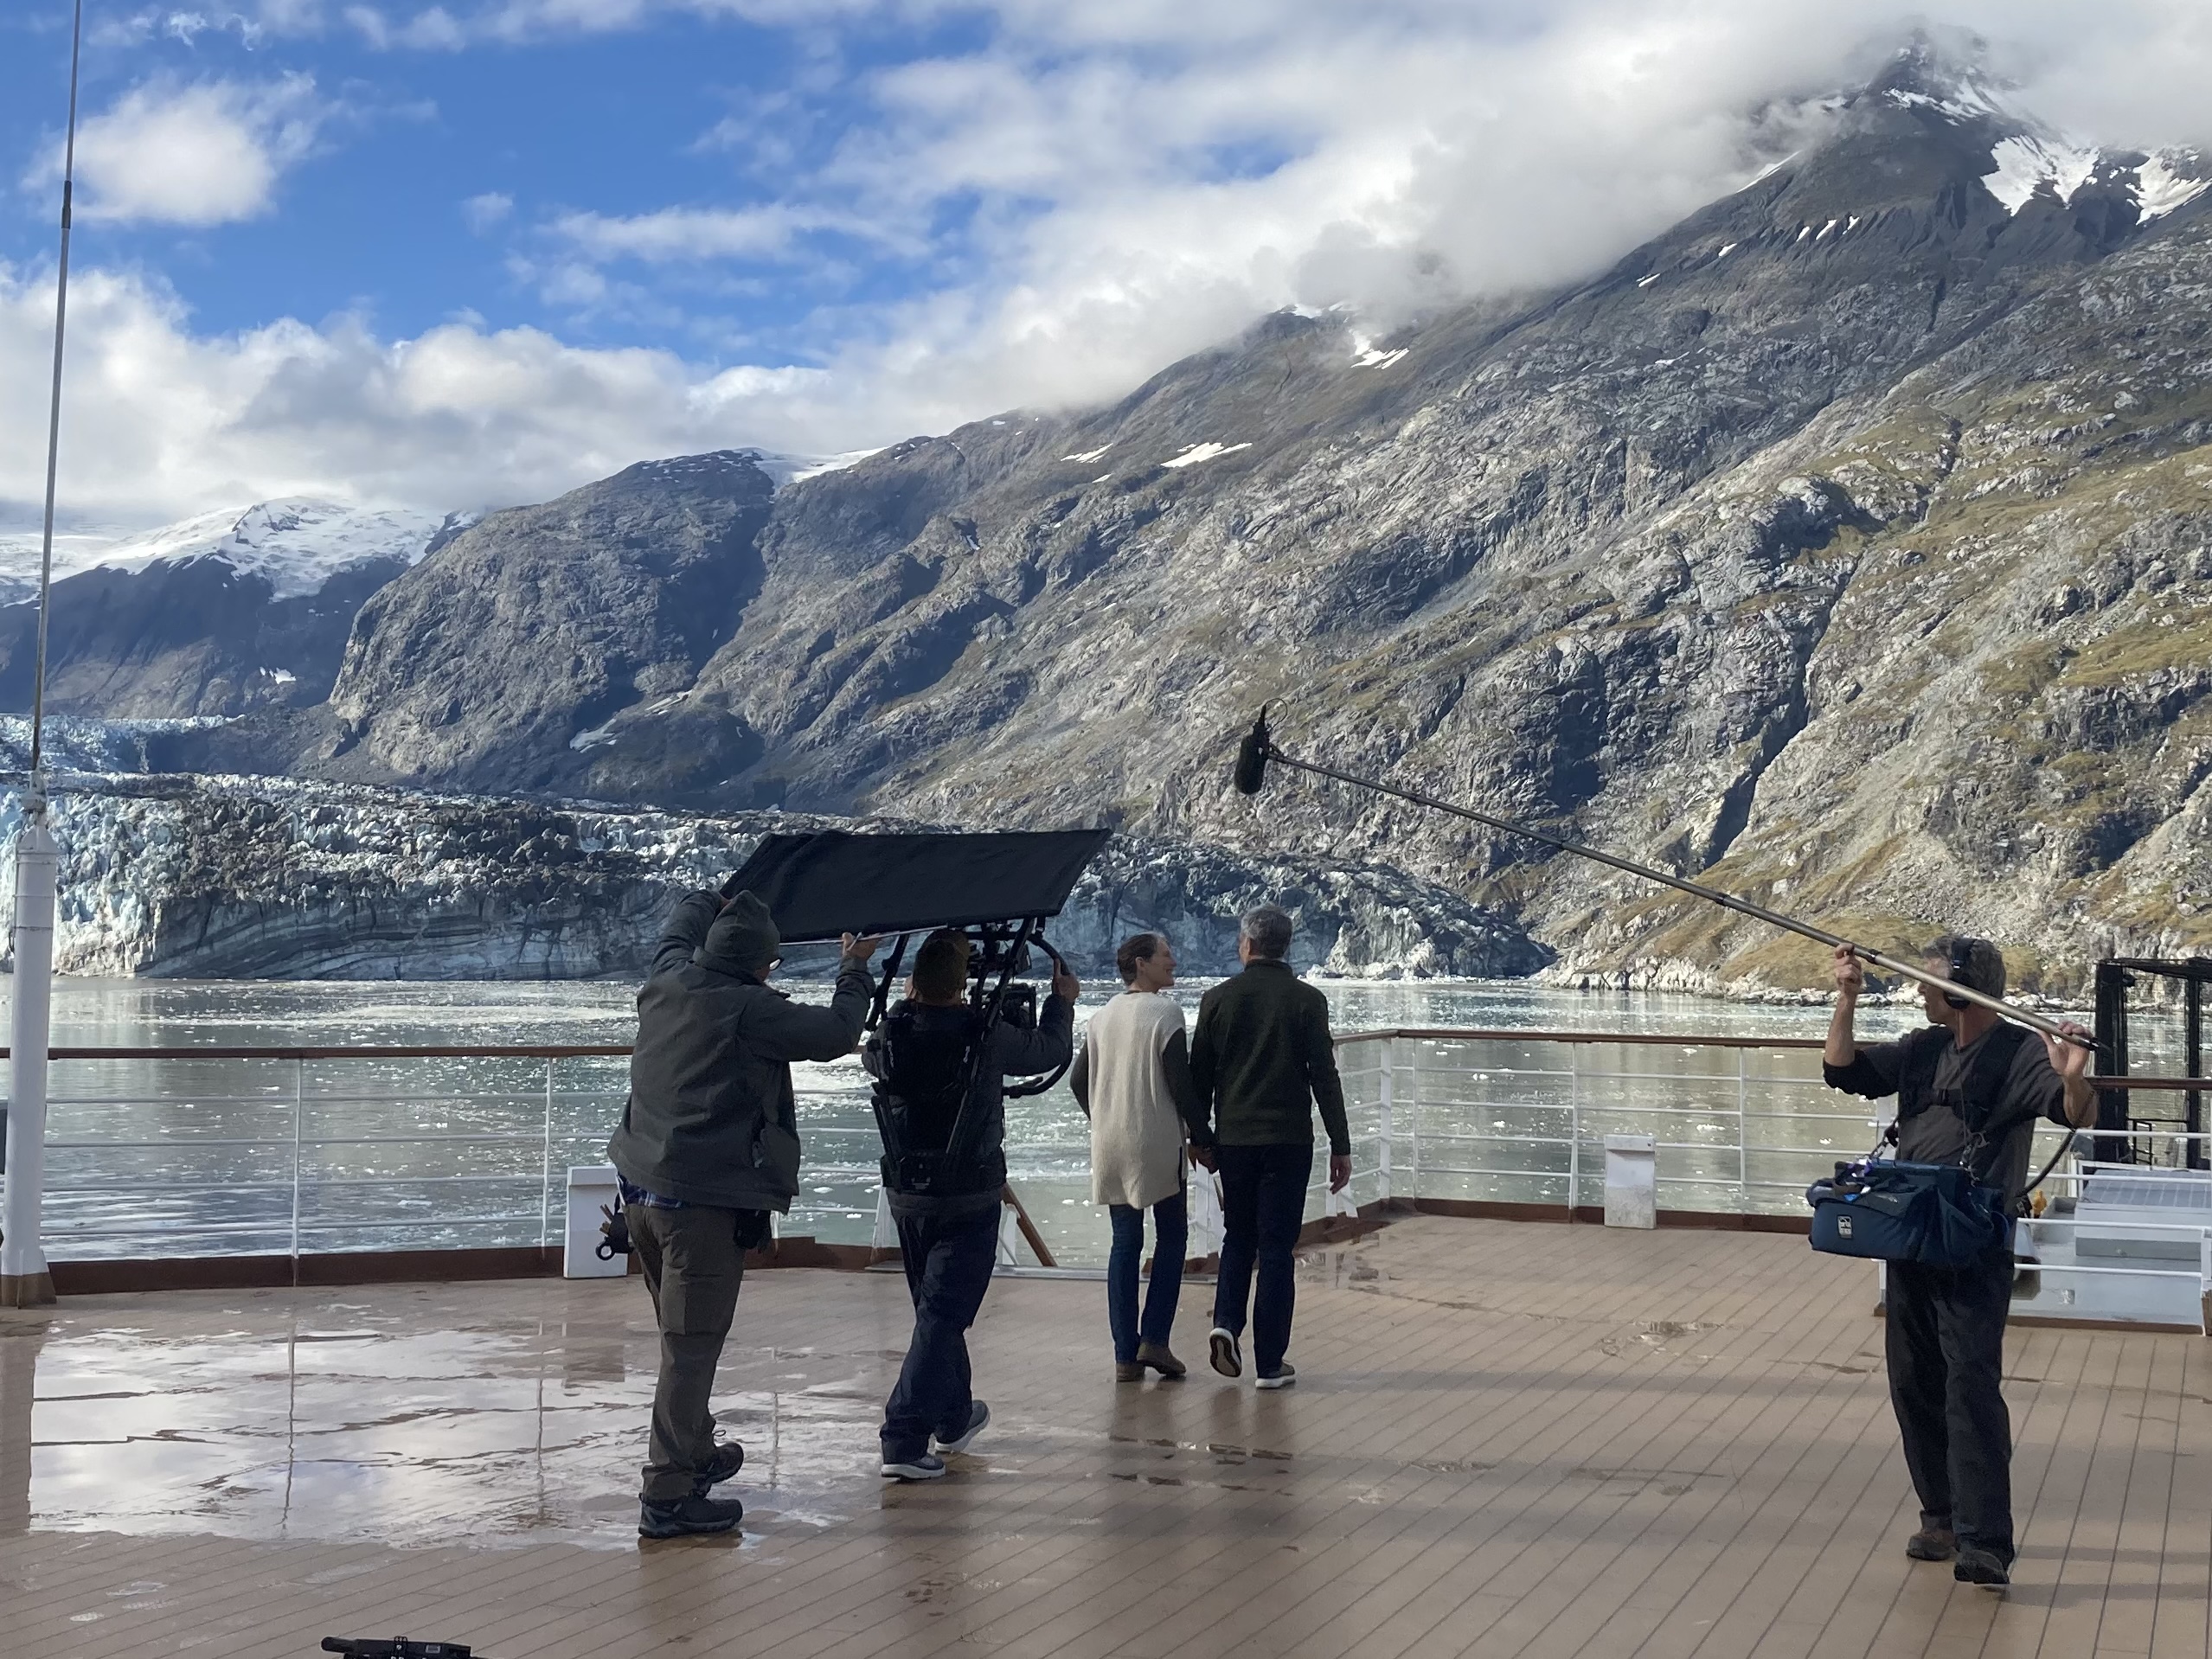 A male actor and afemale actor walk hand in hand, while being filmed by a crew of three people. THey are on the deck of a cruise ship in front of a glacier with grey, snow peaked mountains in the background..